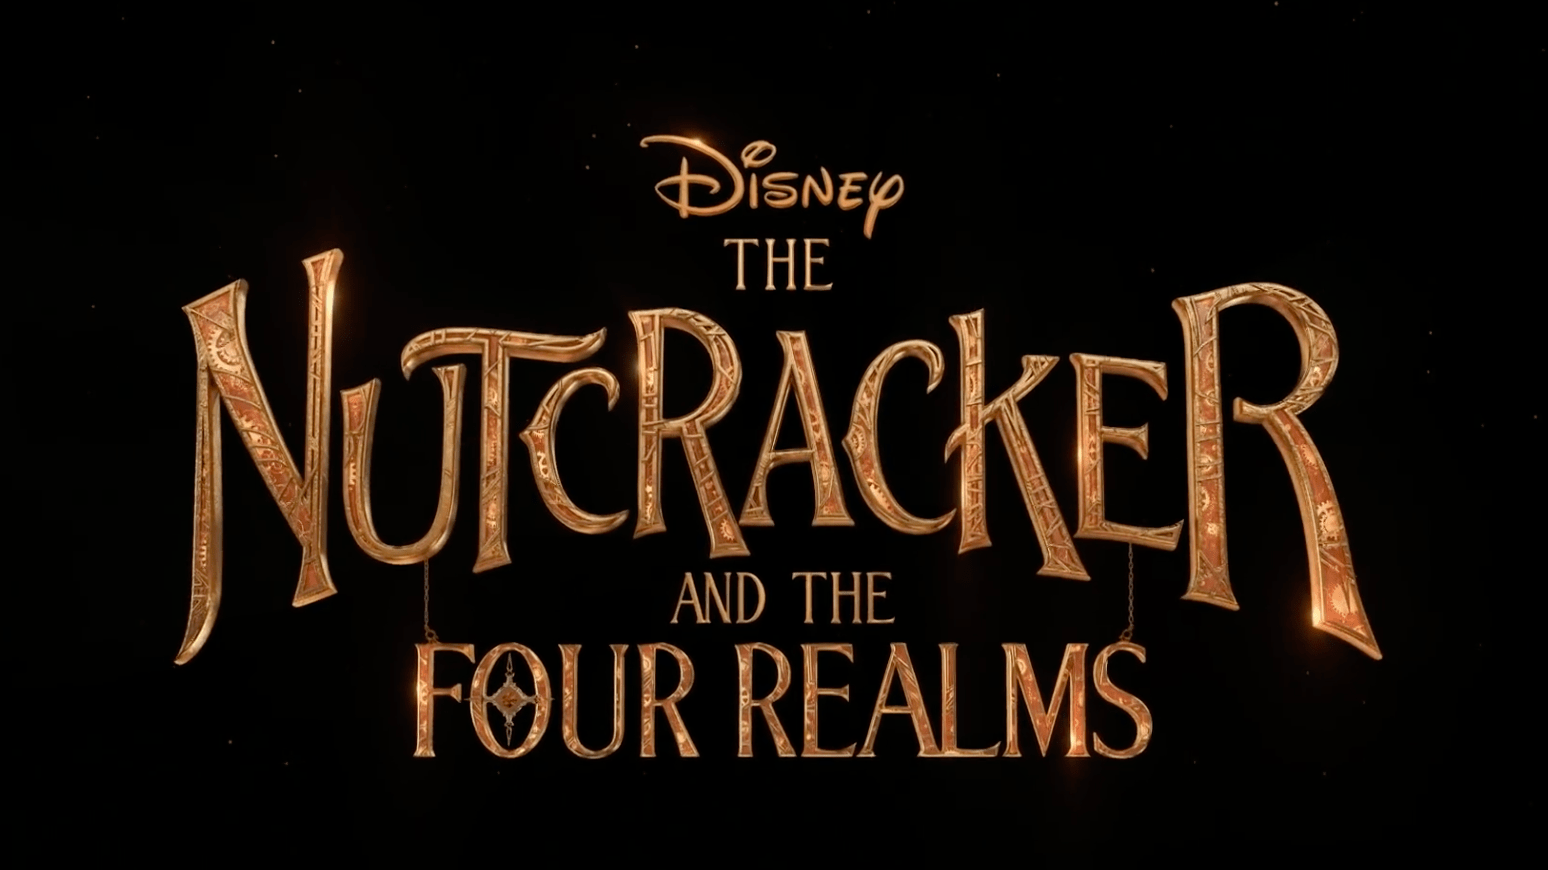 Poster for "The Nutcracker and the Four Realms"